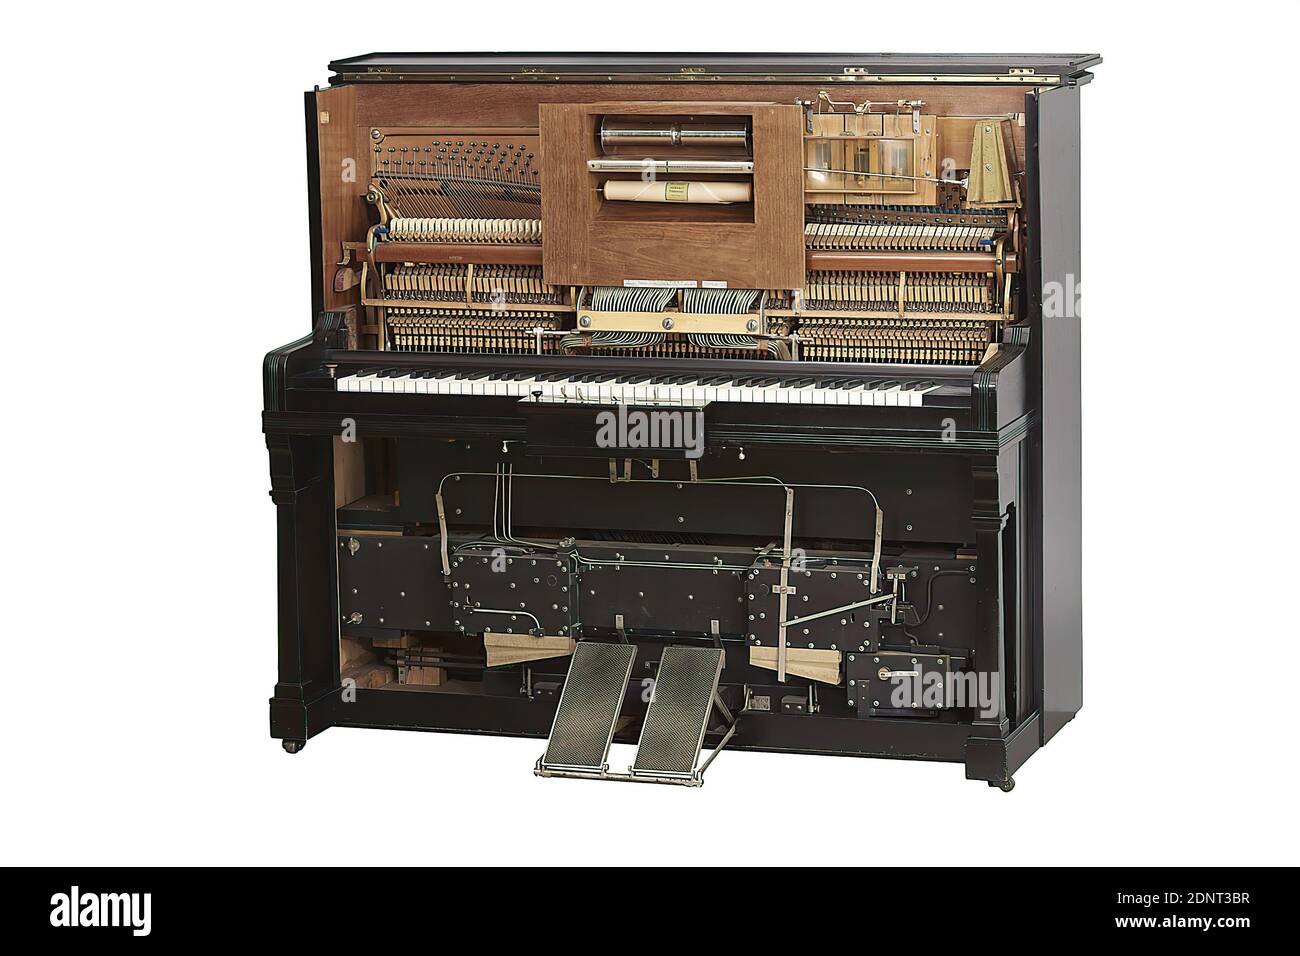 Hegeler & Ehlers, Pianino with automatic self-playing mechanism (roller piano), wood, Total: length: 1570 mm; width: 1320 mm; height: 660 mm, manufacturing number 3592, keyboard instruments, historicism Stock Photo